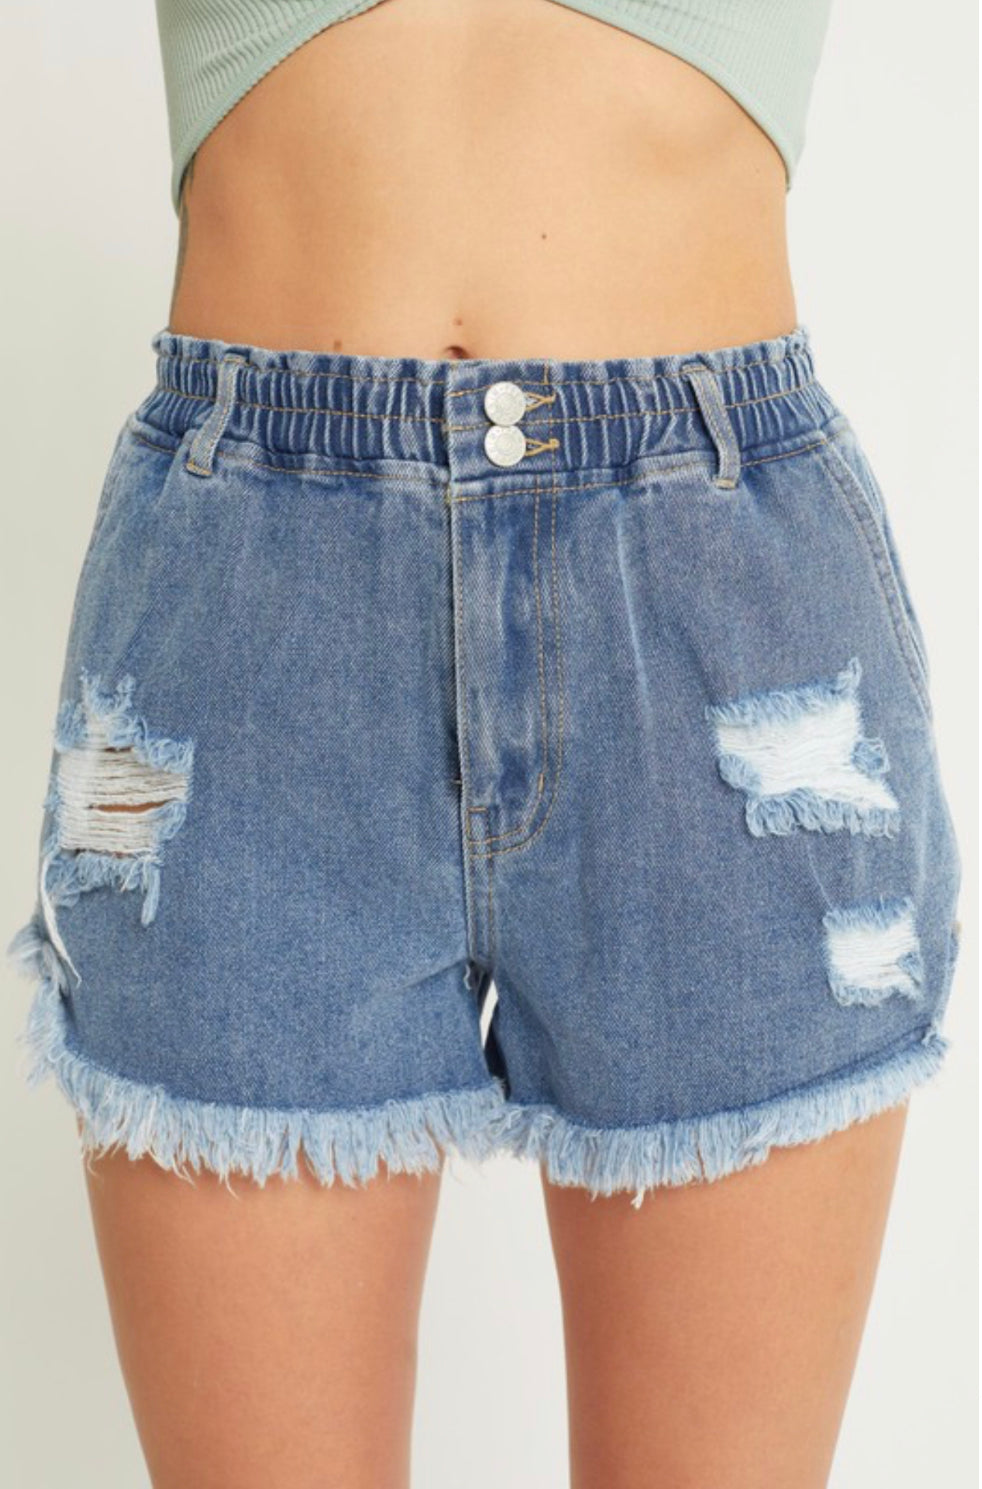 Denim Shorts - Style by me